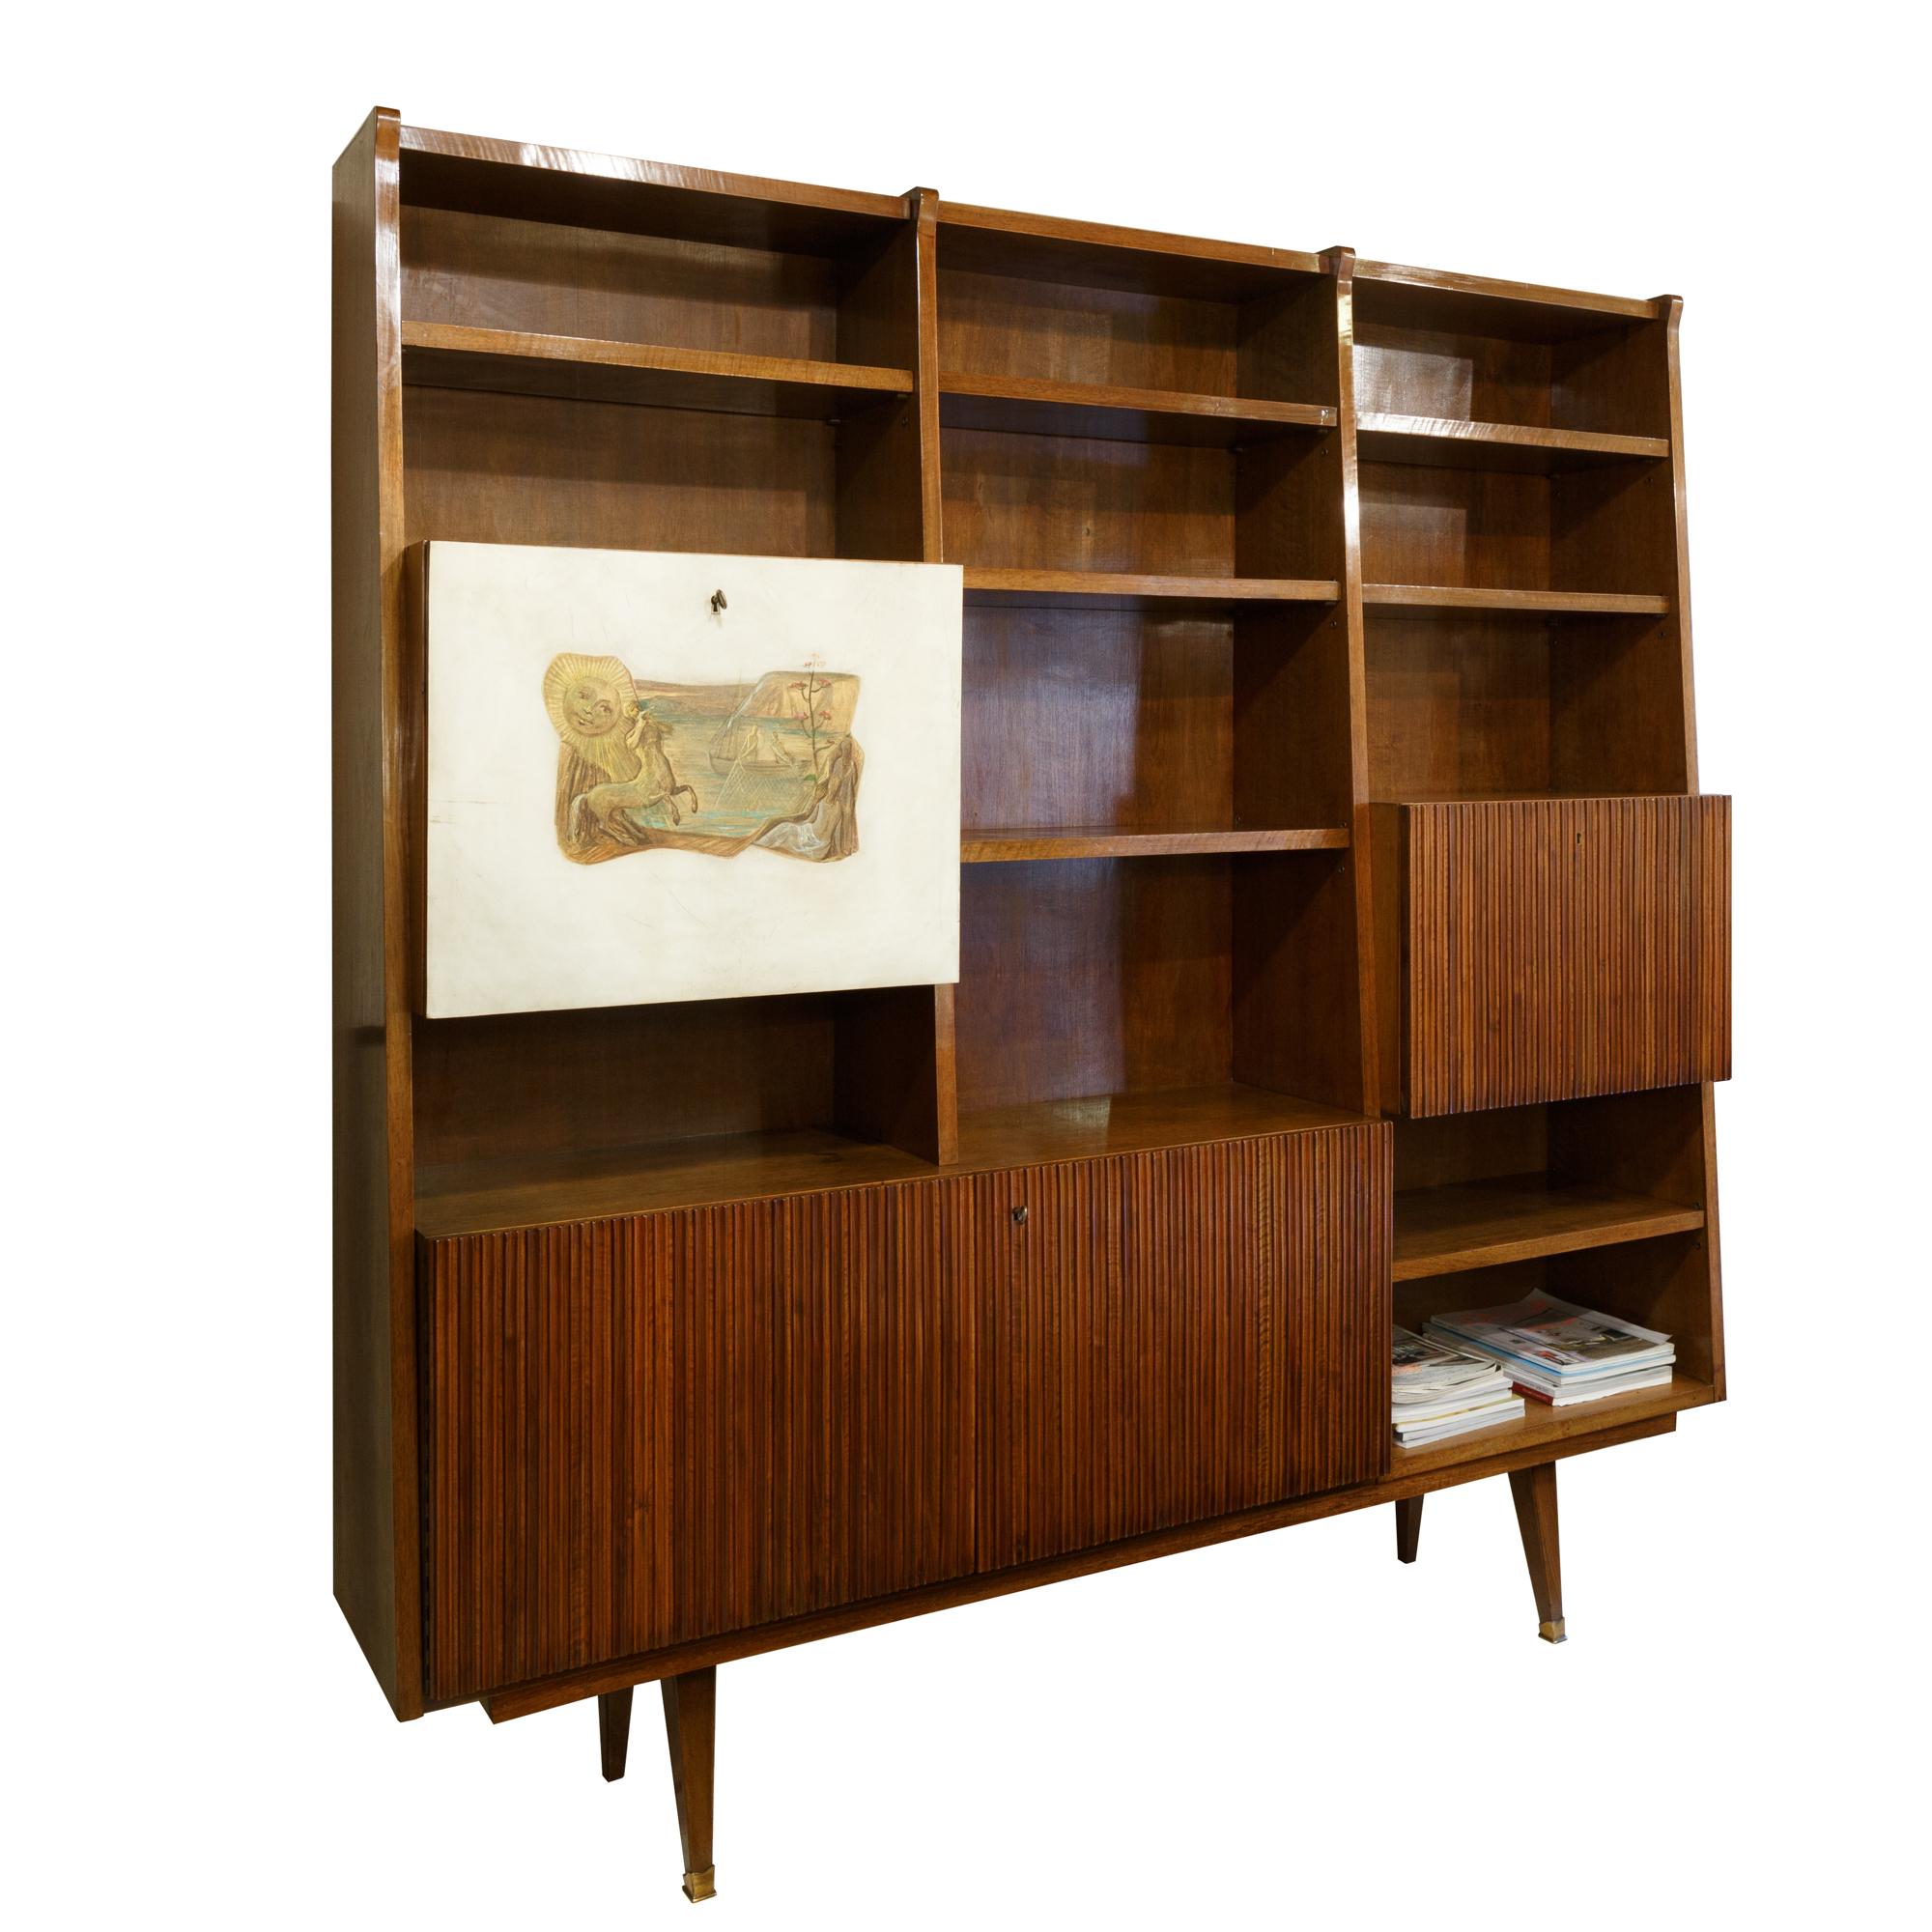 Italian Bookcase Desk in the Style Gio Ponti Italy 1950s Painted Parchment